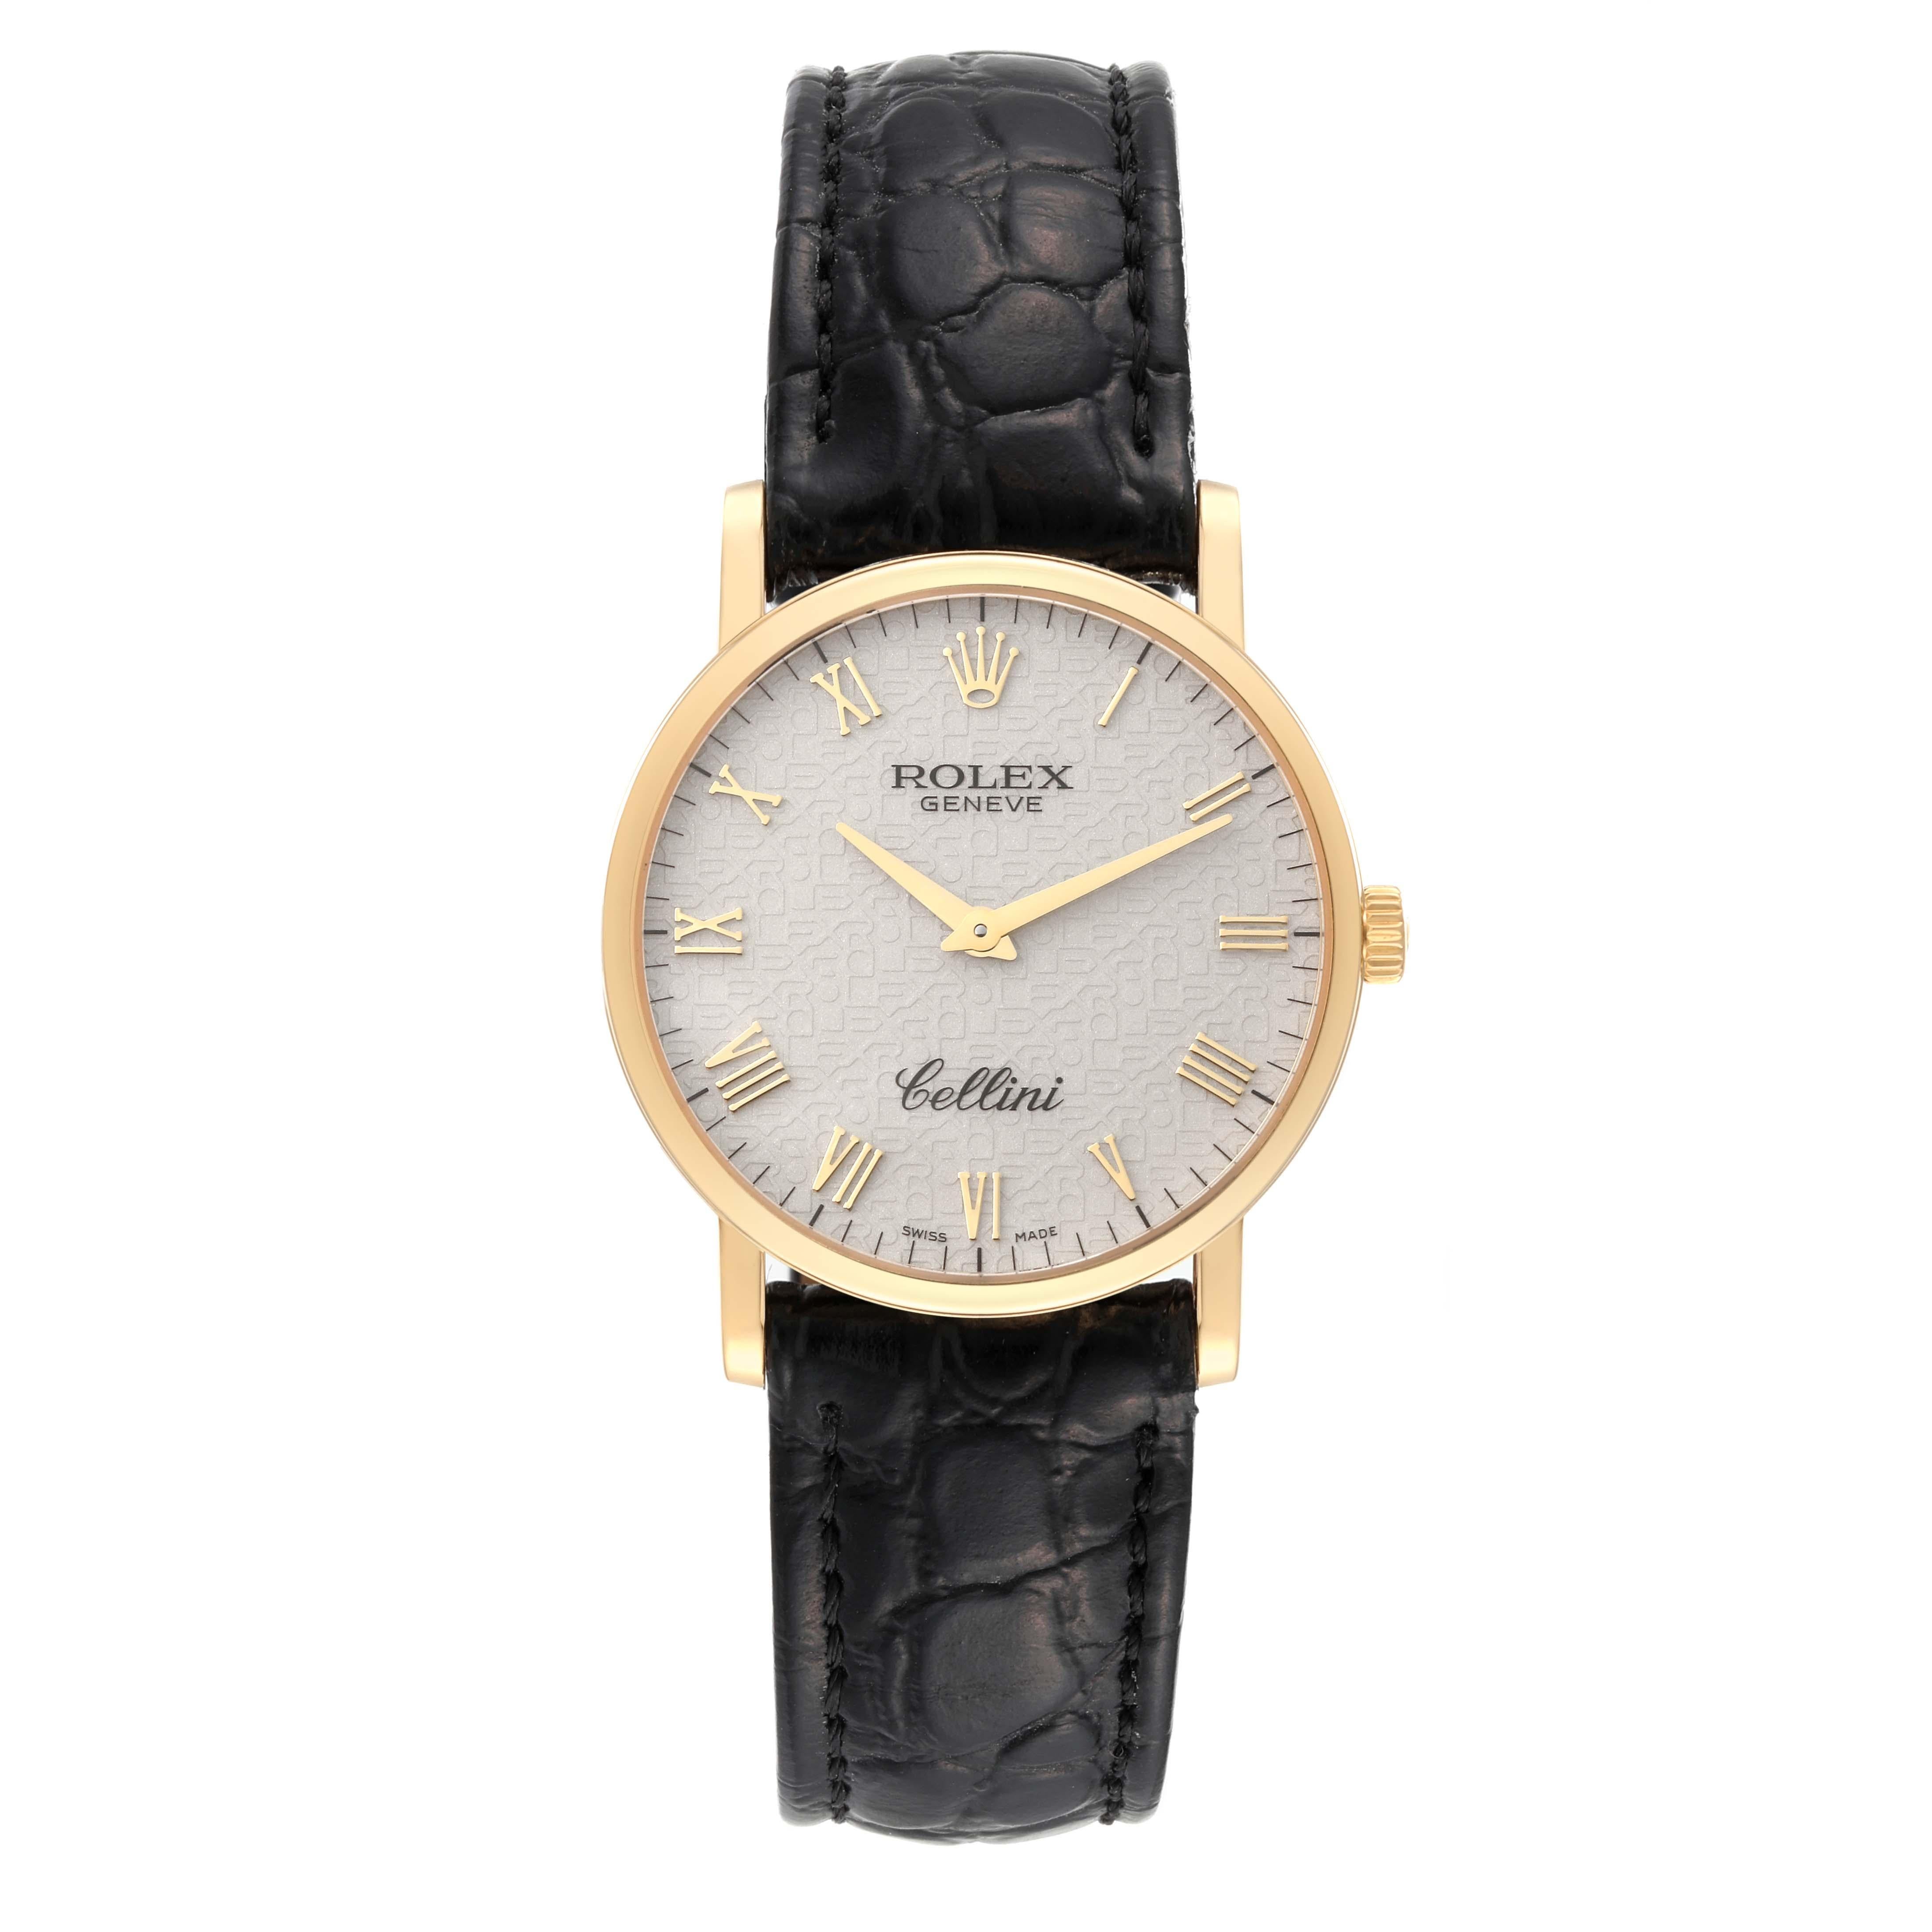 Rolex Cellini Classic Yellow Gold Ivory Anniversary Dial Mens Watch 5115. Manual winding movement. 18K yellow gold slim case 32mm in diameter. 5.5mm case thickness. Rolex logo on the crown. . Scratch resistant sapphire crystal. Flat profile. Ivory